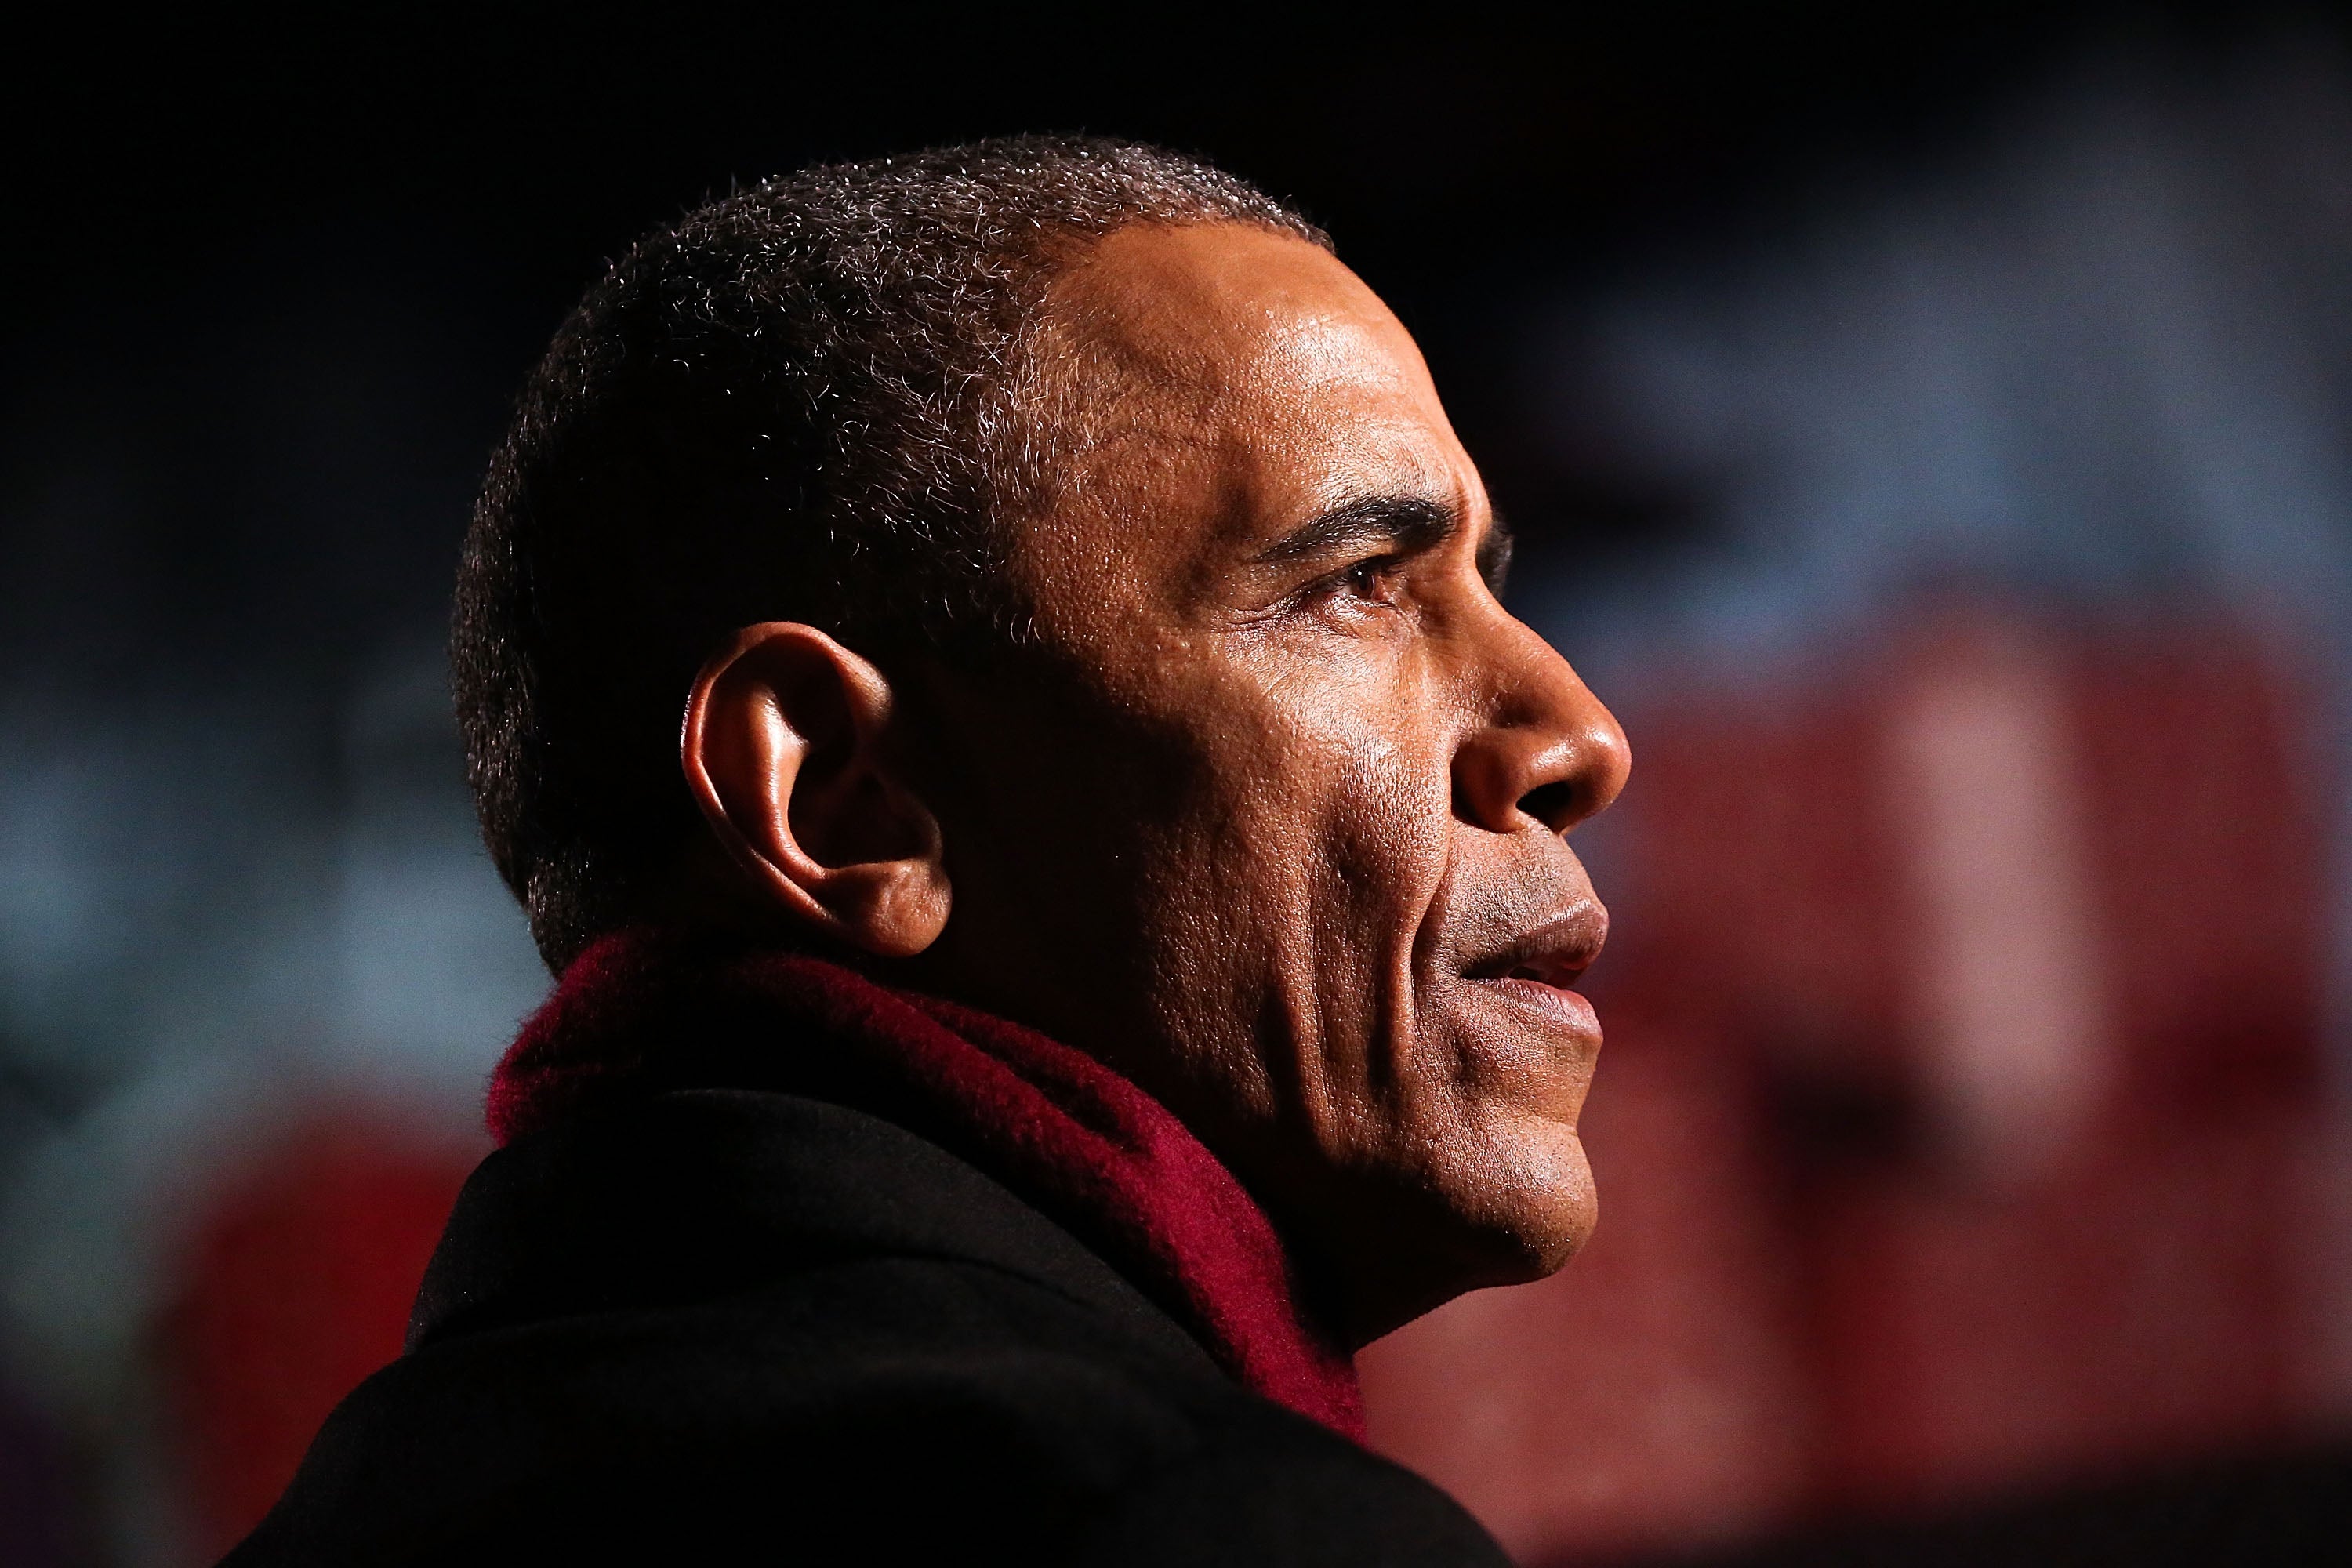 Barack Obama Gets Real, Opens Up About The Racism He Has Faced During Presidency
